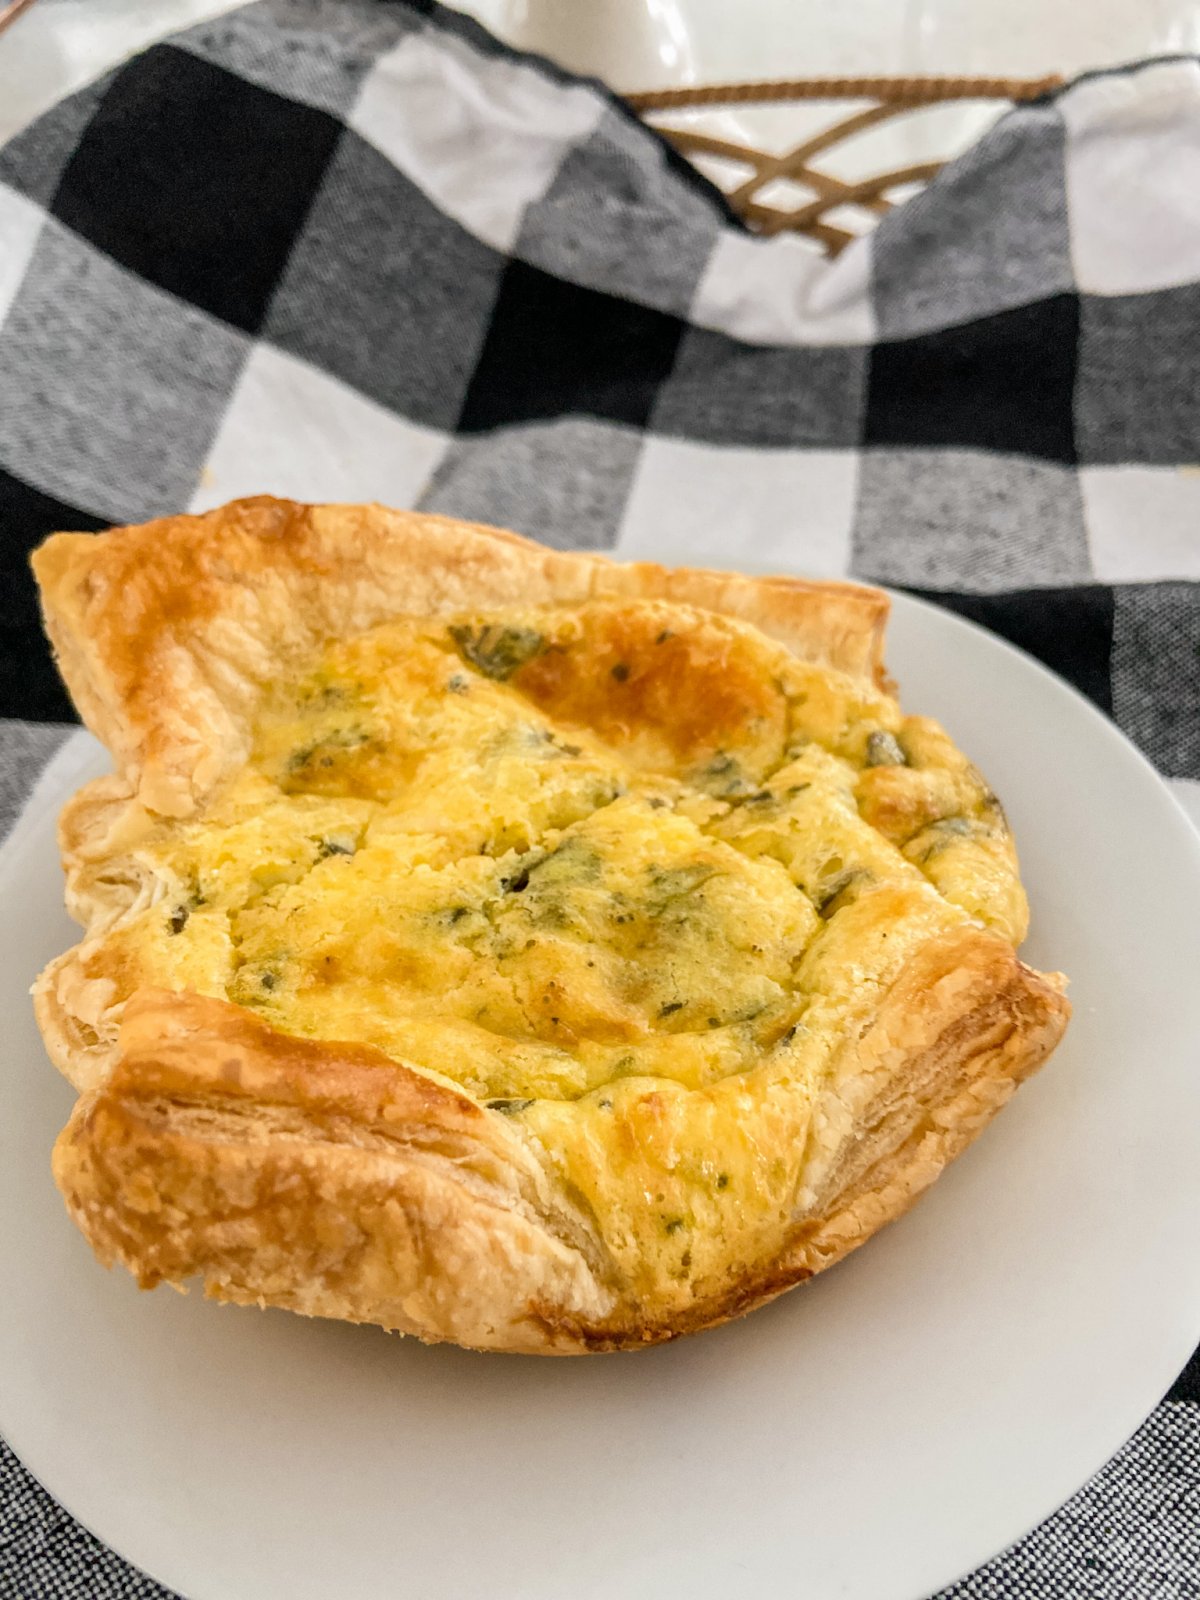 Copycat Panera Spinach and Artichoke Egg Soufflés. Fluffy eggs in a delicious spinach artichoke batter baked in layers of light flakey crust will impress weekend guests and the best part is they are SO easy to make! 